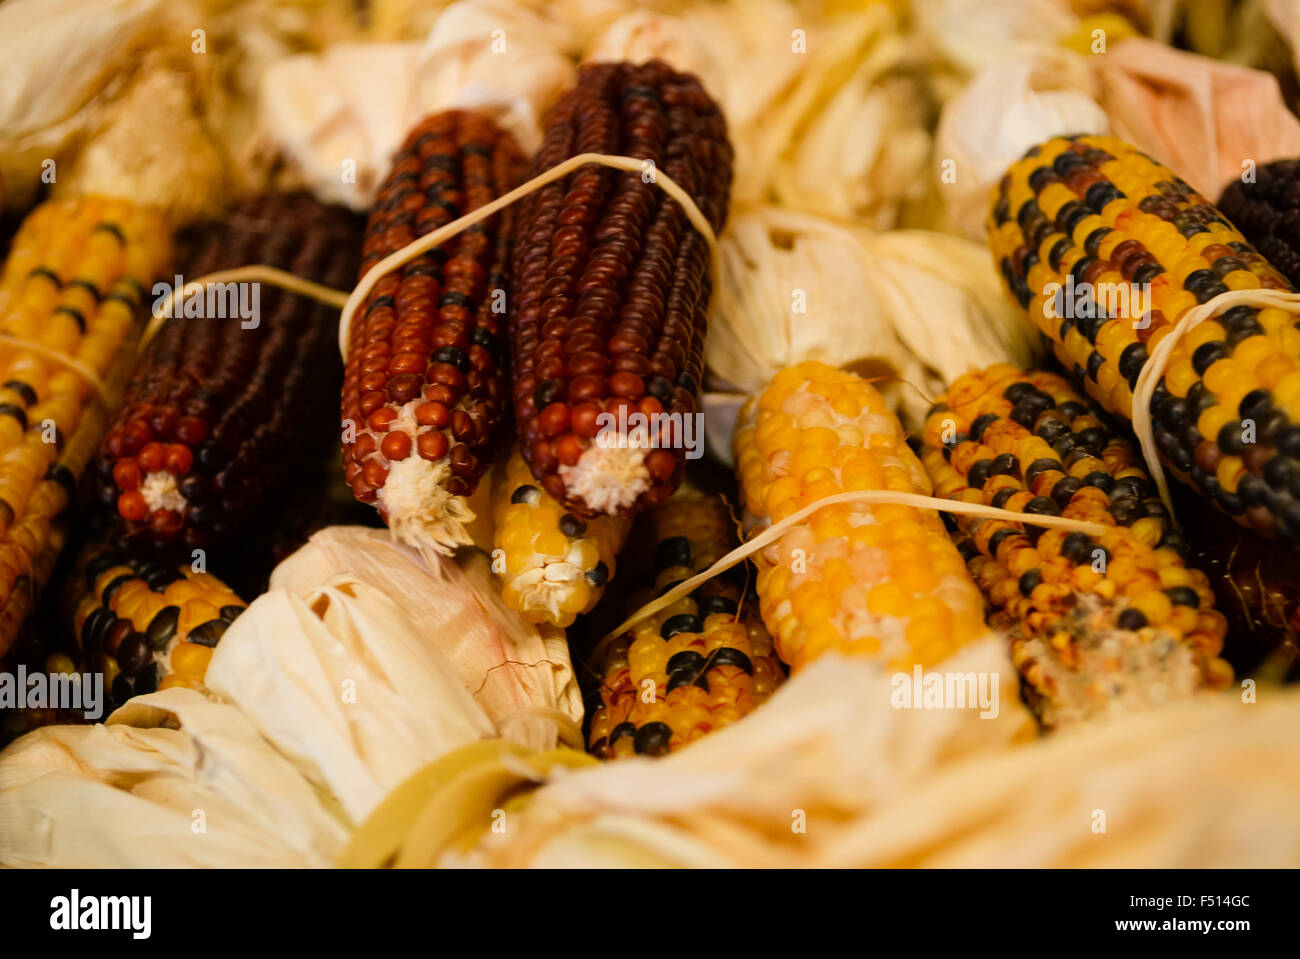 Close-up of yellow and red corn with stalks bundled for sale. Stock Photo